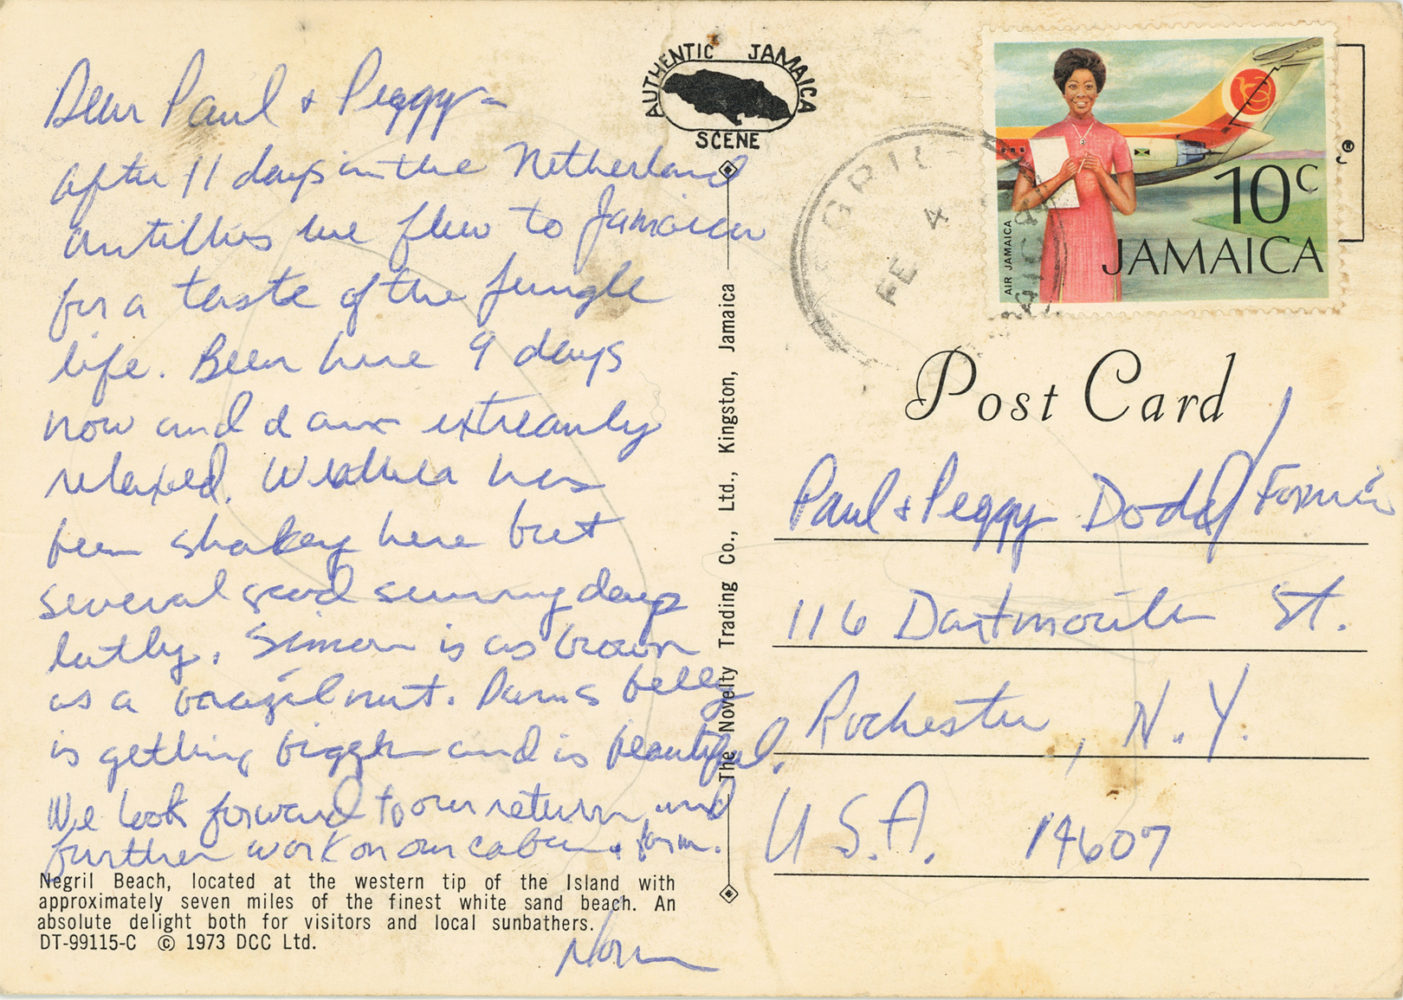 The postcard from Norm Ladd in Negril